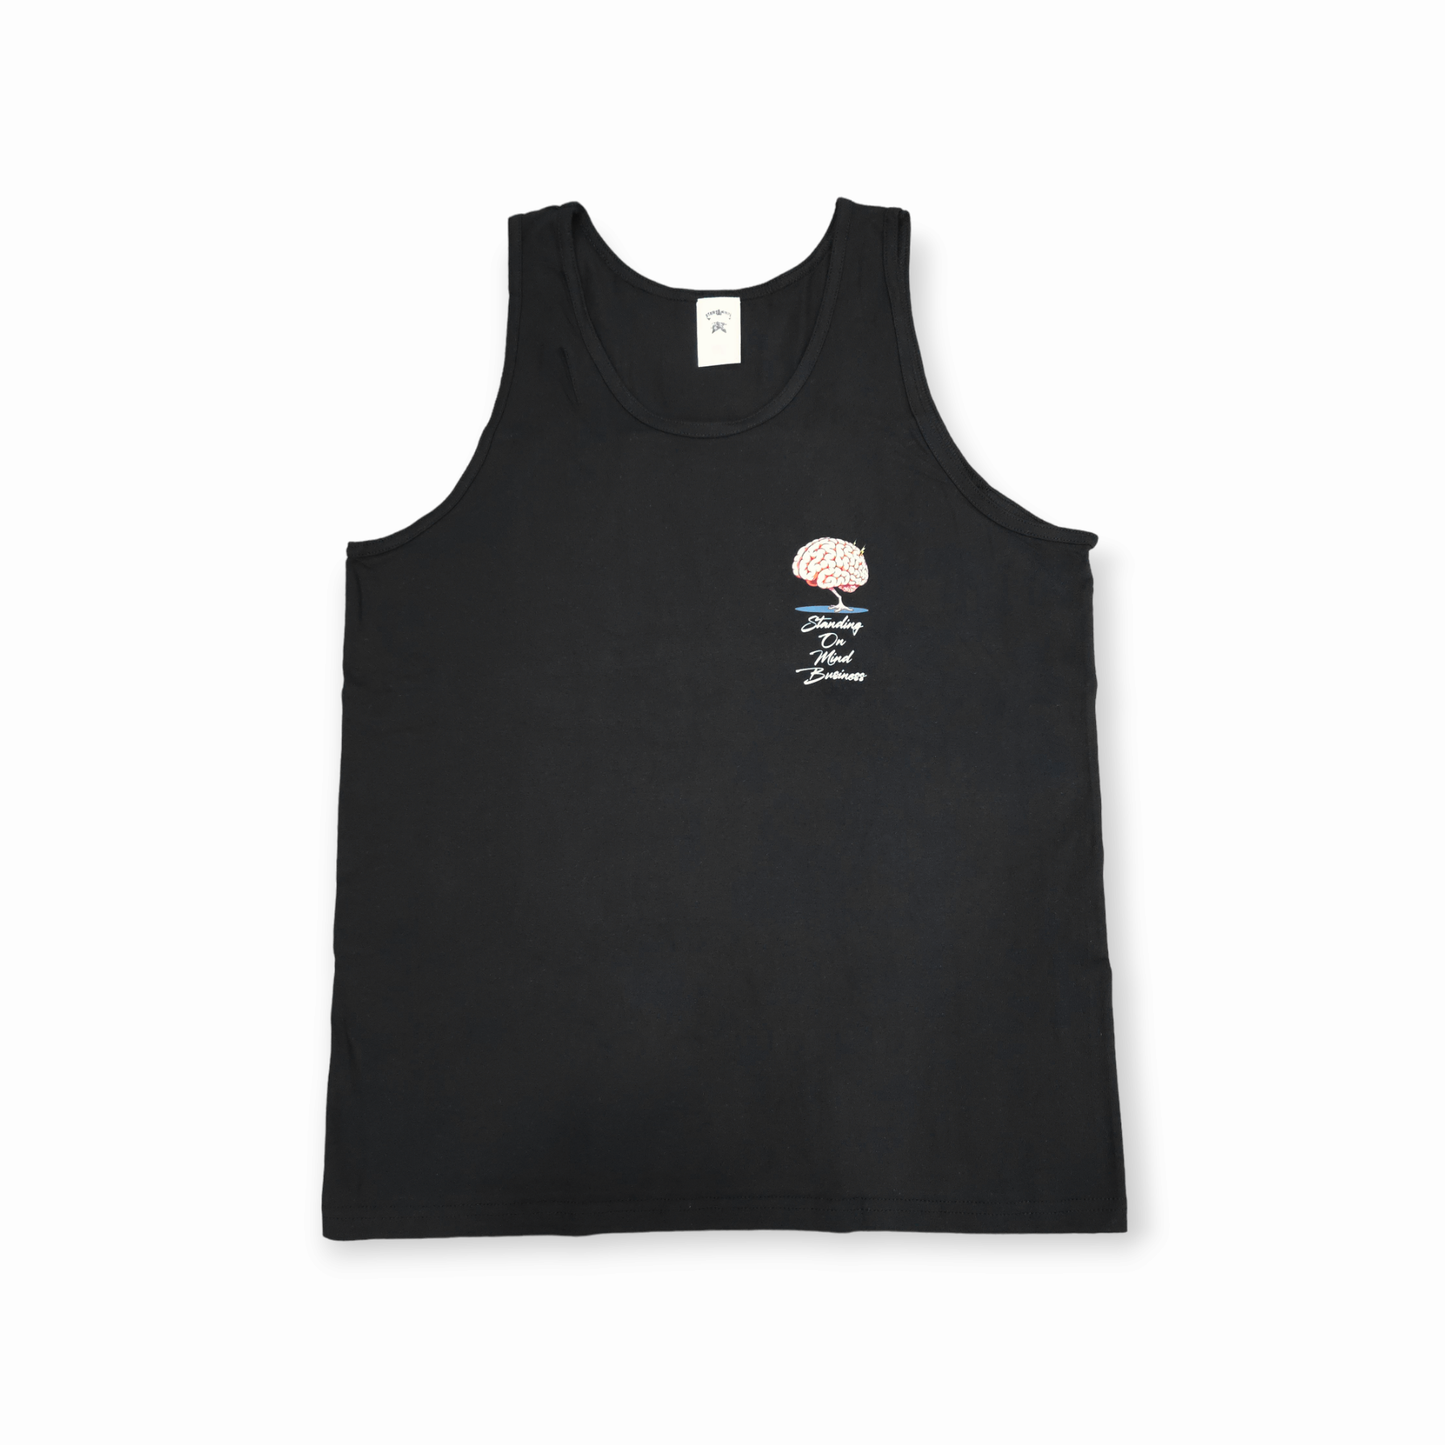 Stained Men's - S.O.M.B Tank Top